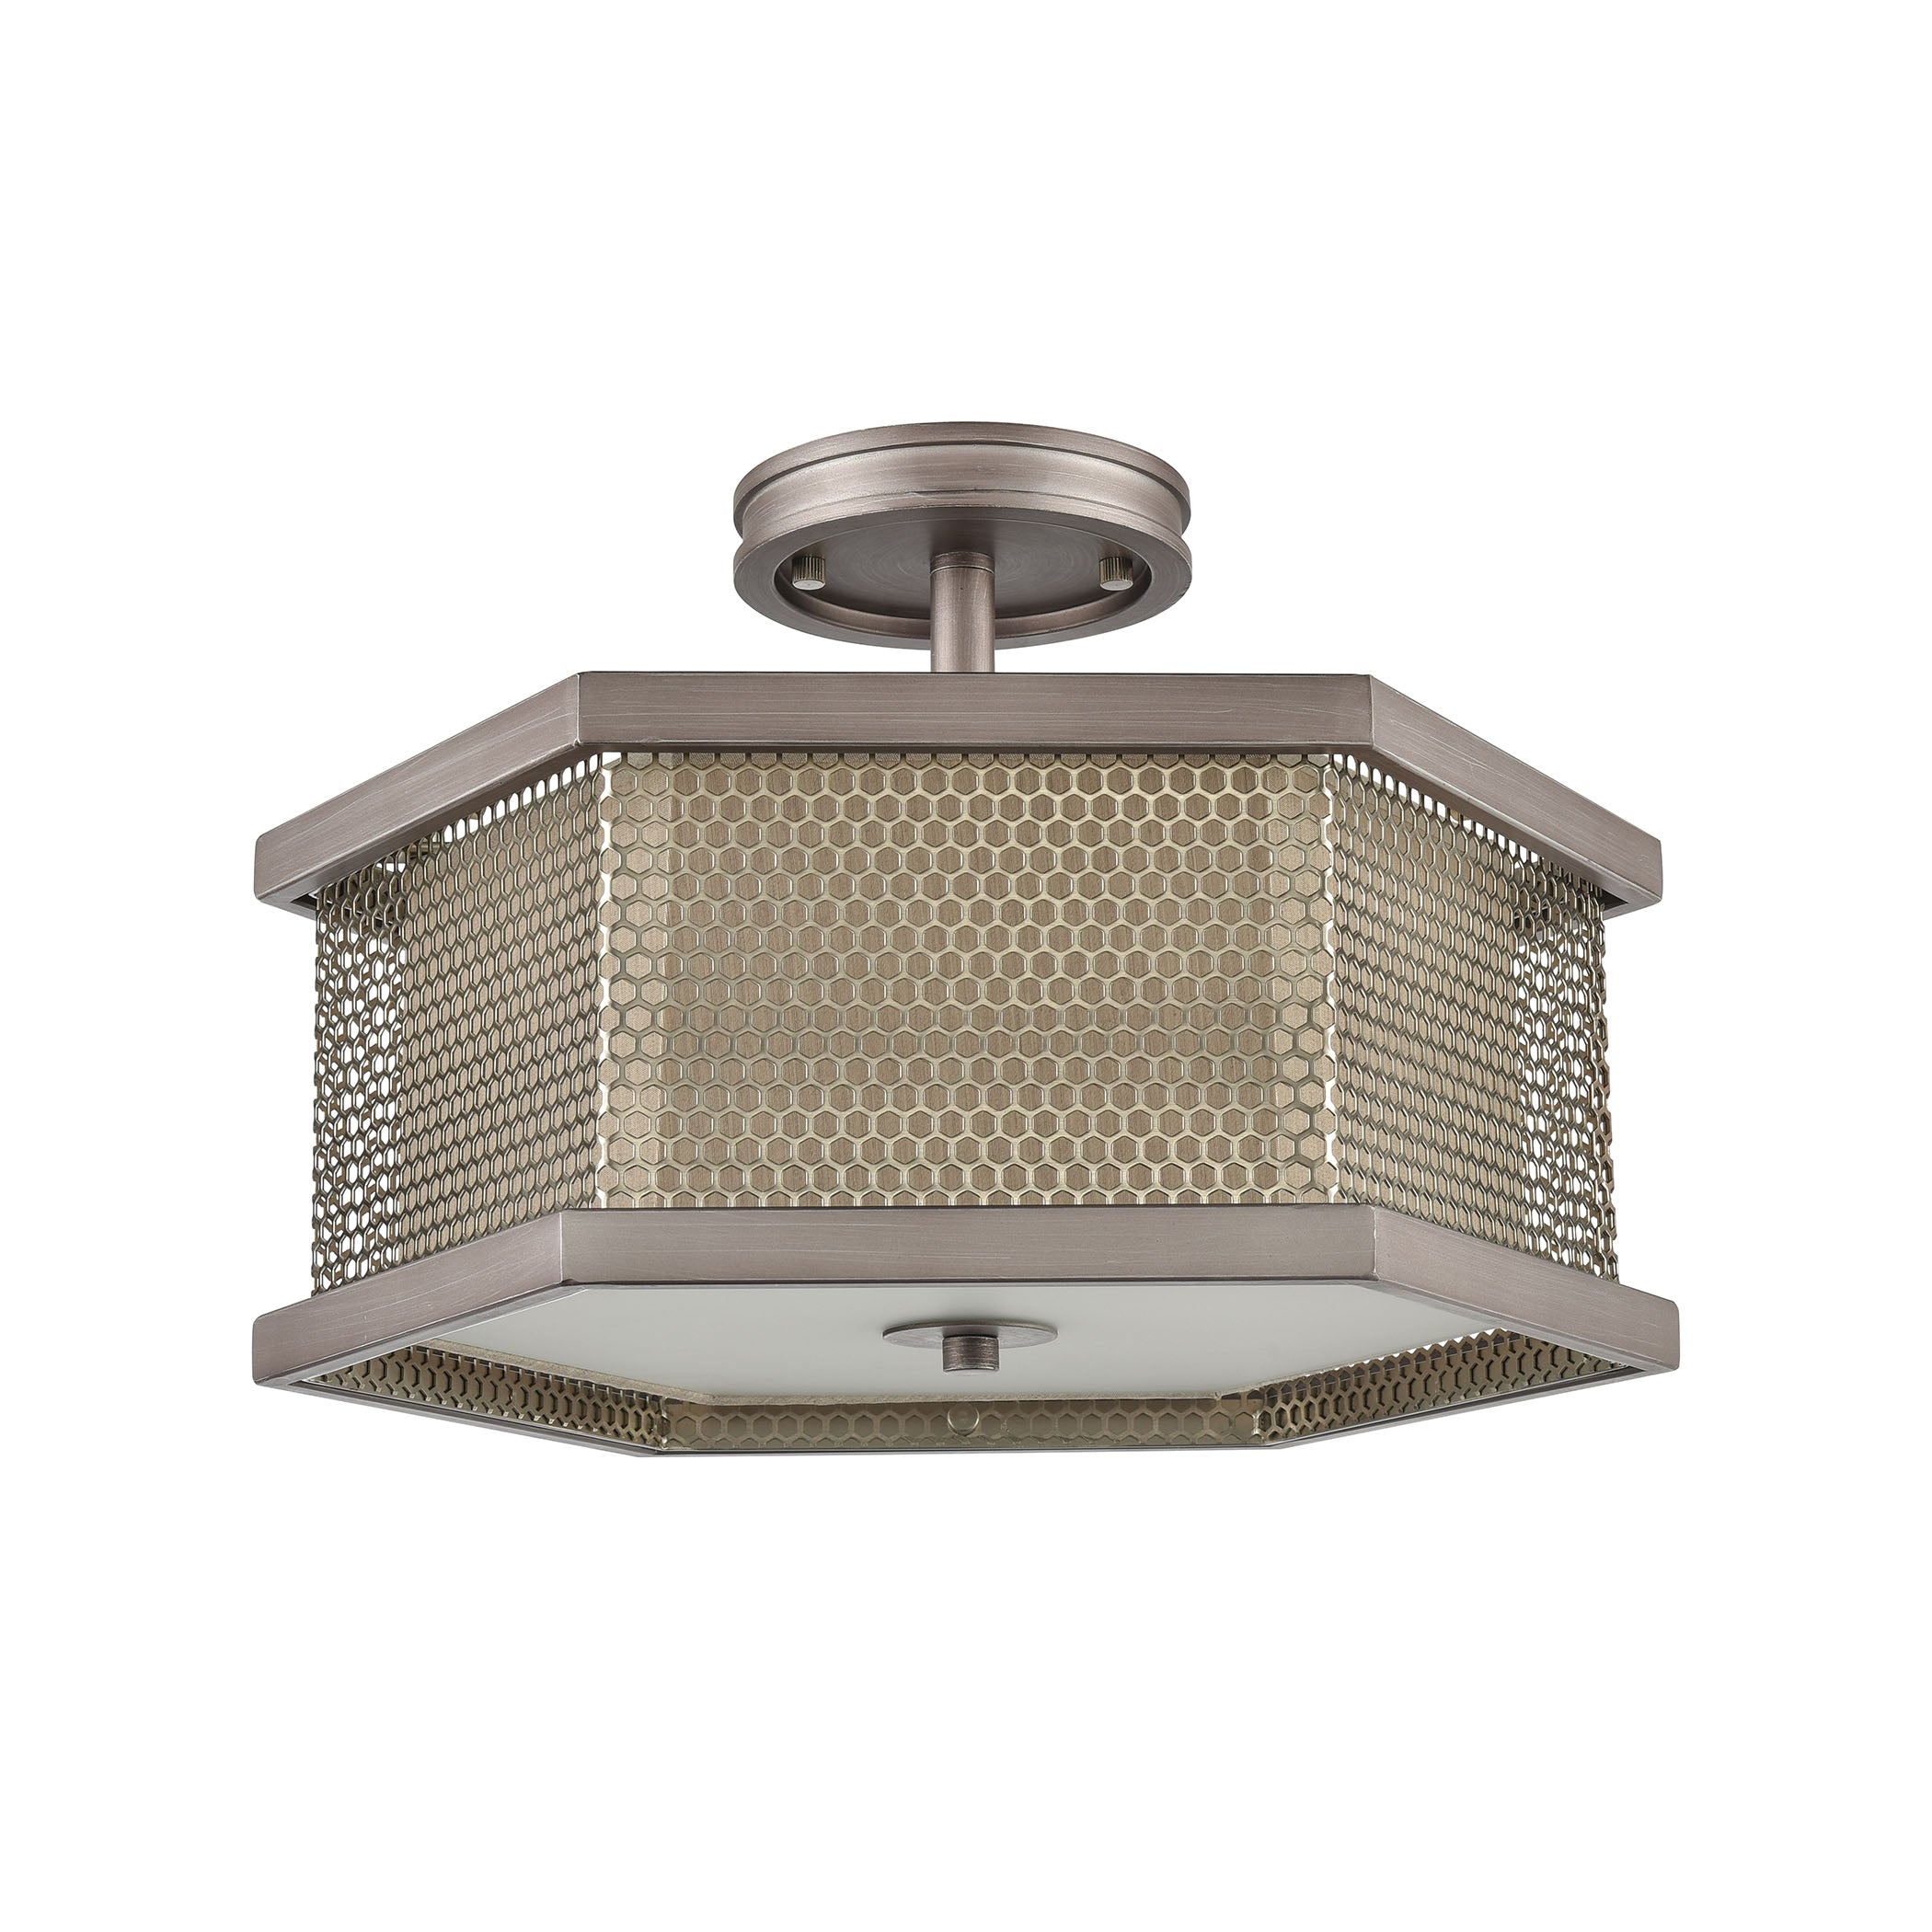 ELK Lighting 15662/2 Crestler 2-Light Semi Flush in Weathered Zinc and Polished Nickel Mesh with Beige Fabric Shade